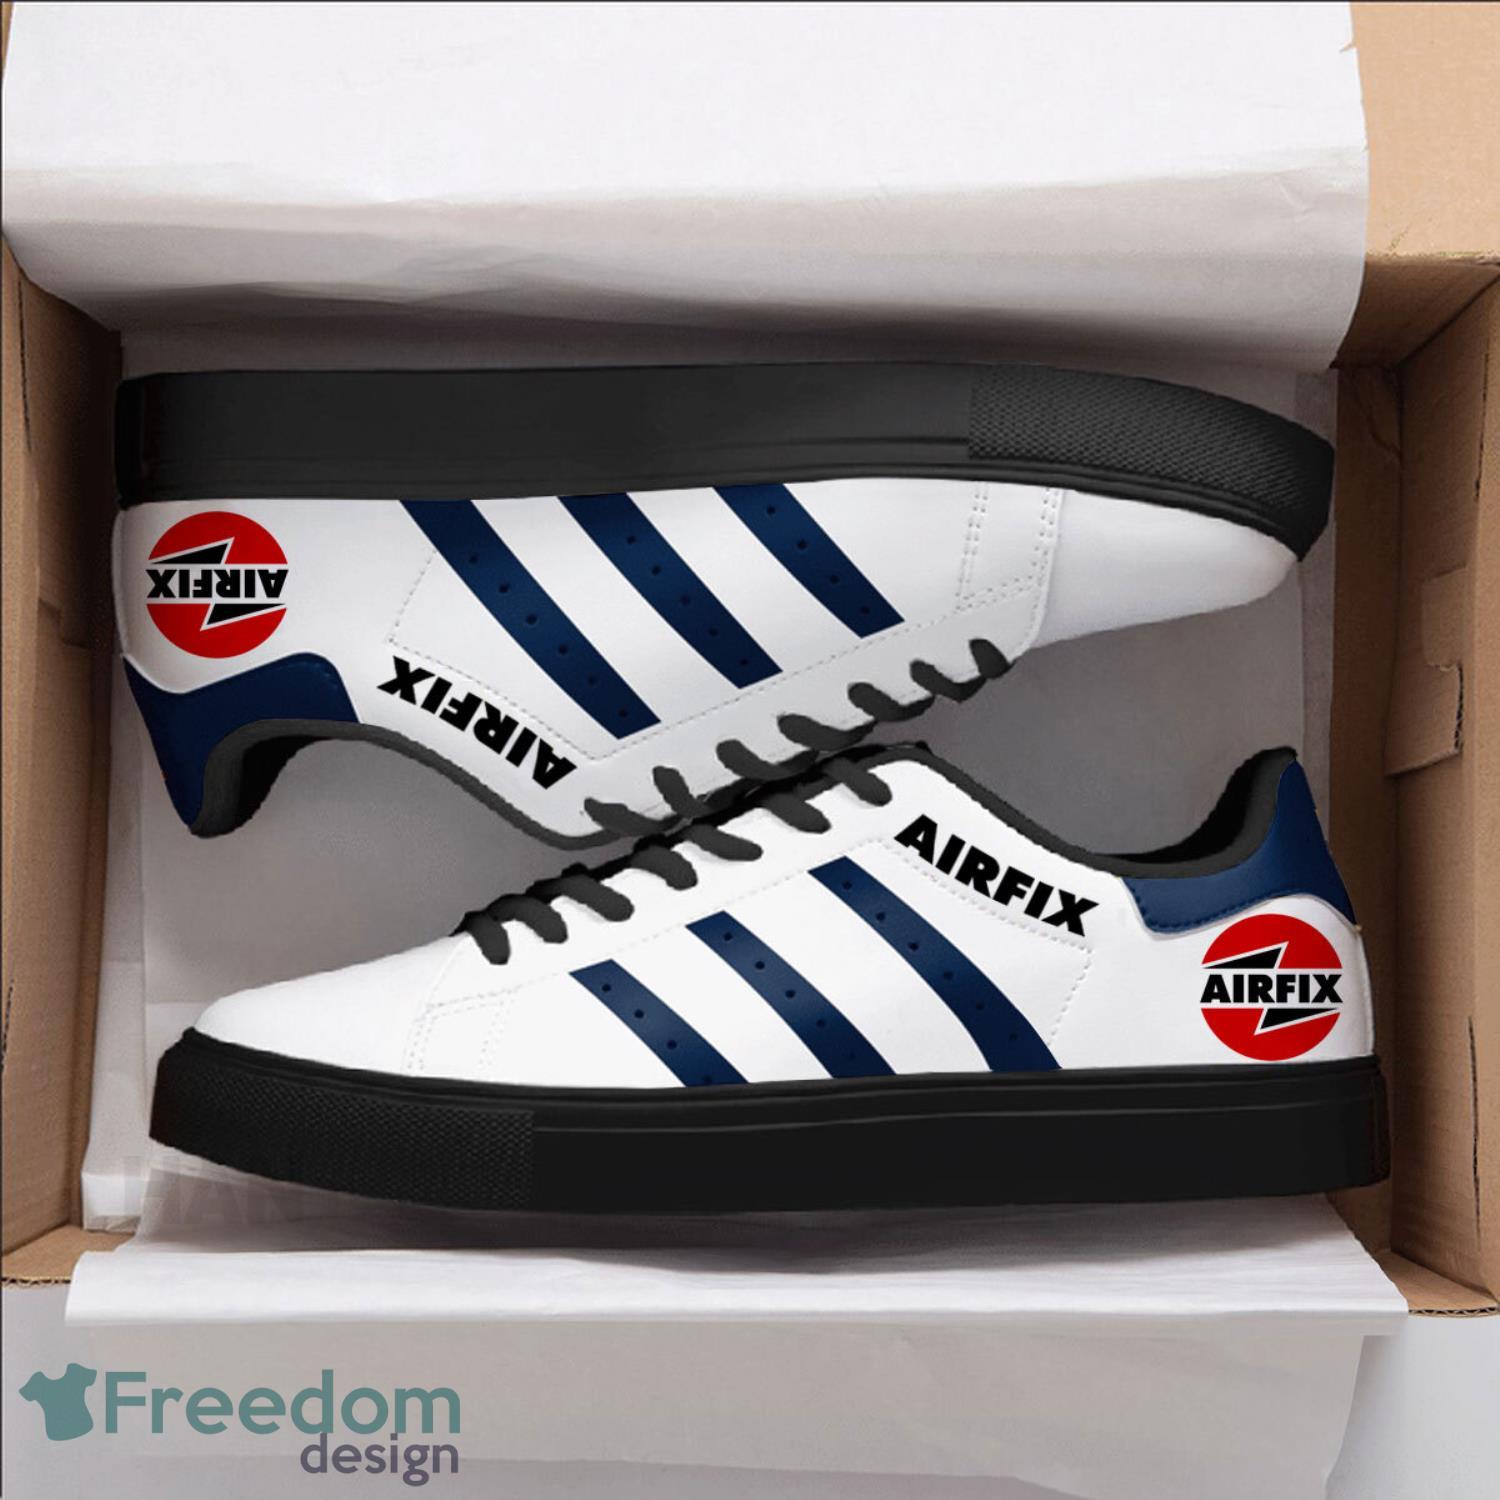 Airfix Low Top Skate Shoes Limited Version Gift Ideas For Fans Product Photo 2